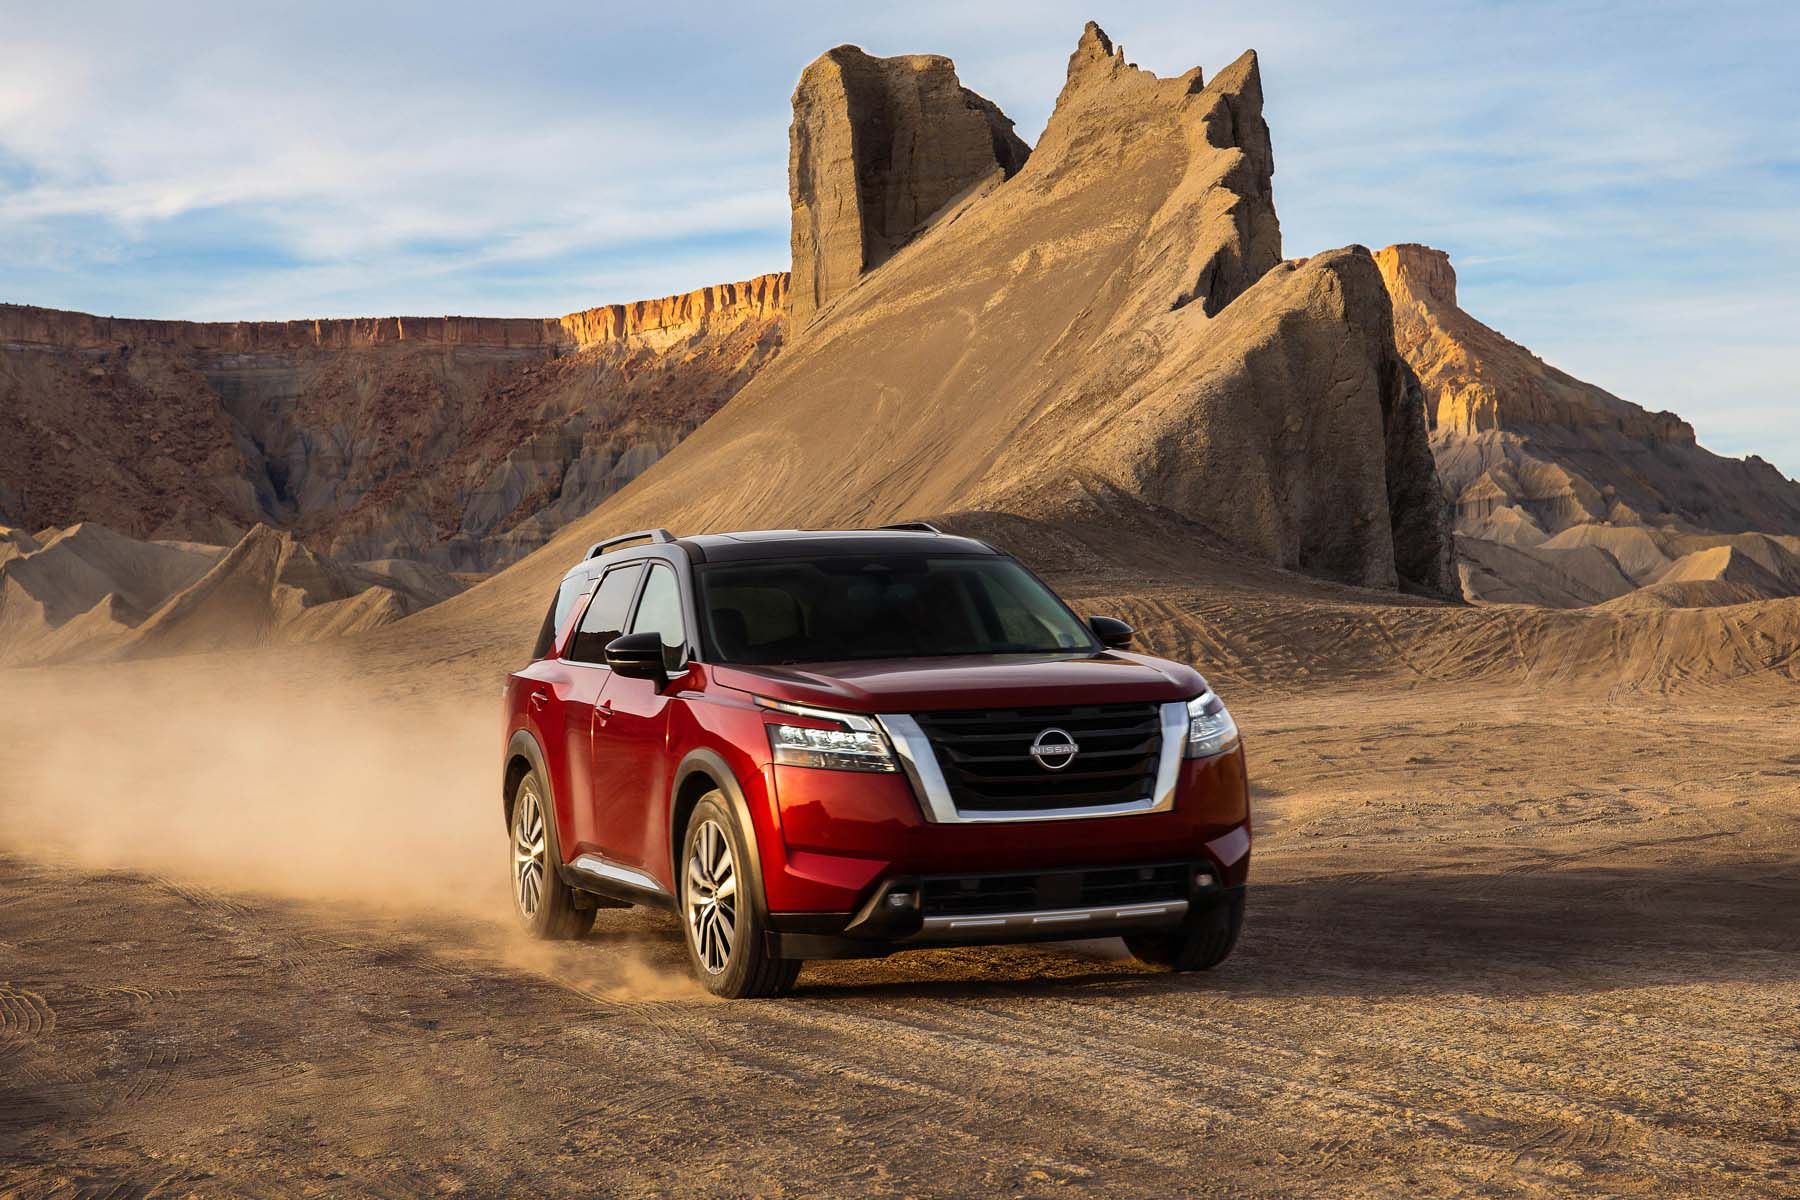 The 2022 Nissan Pathfinder looks back to its roots to move forward